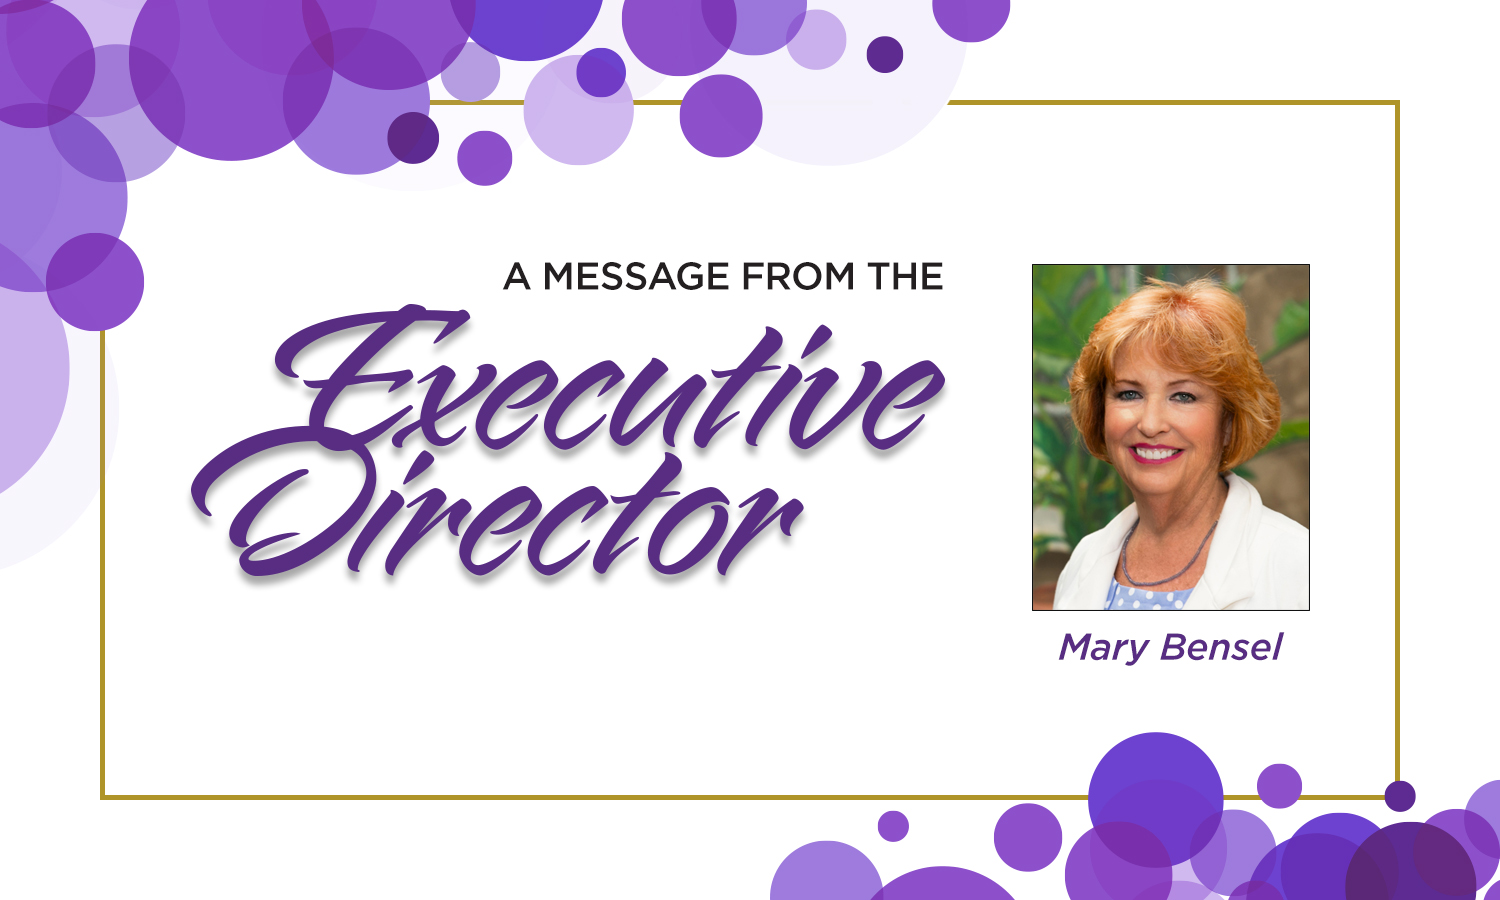 From the Executive Director